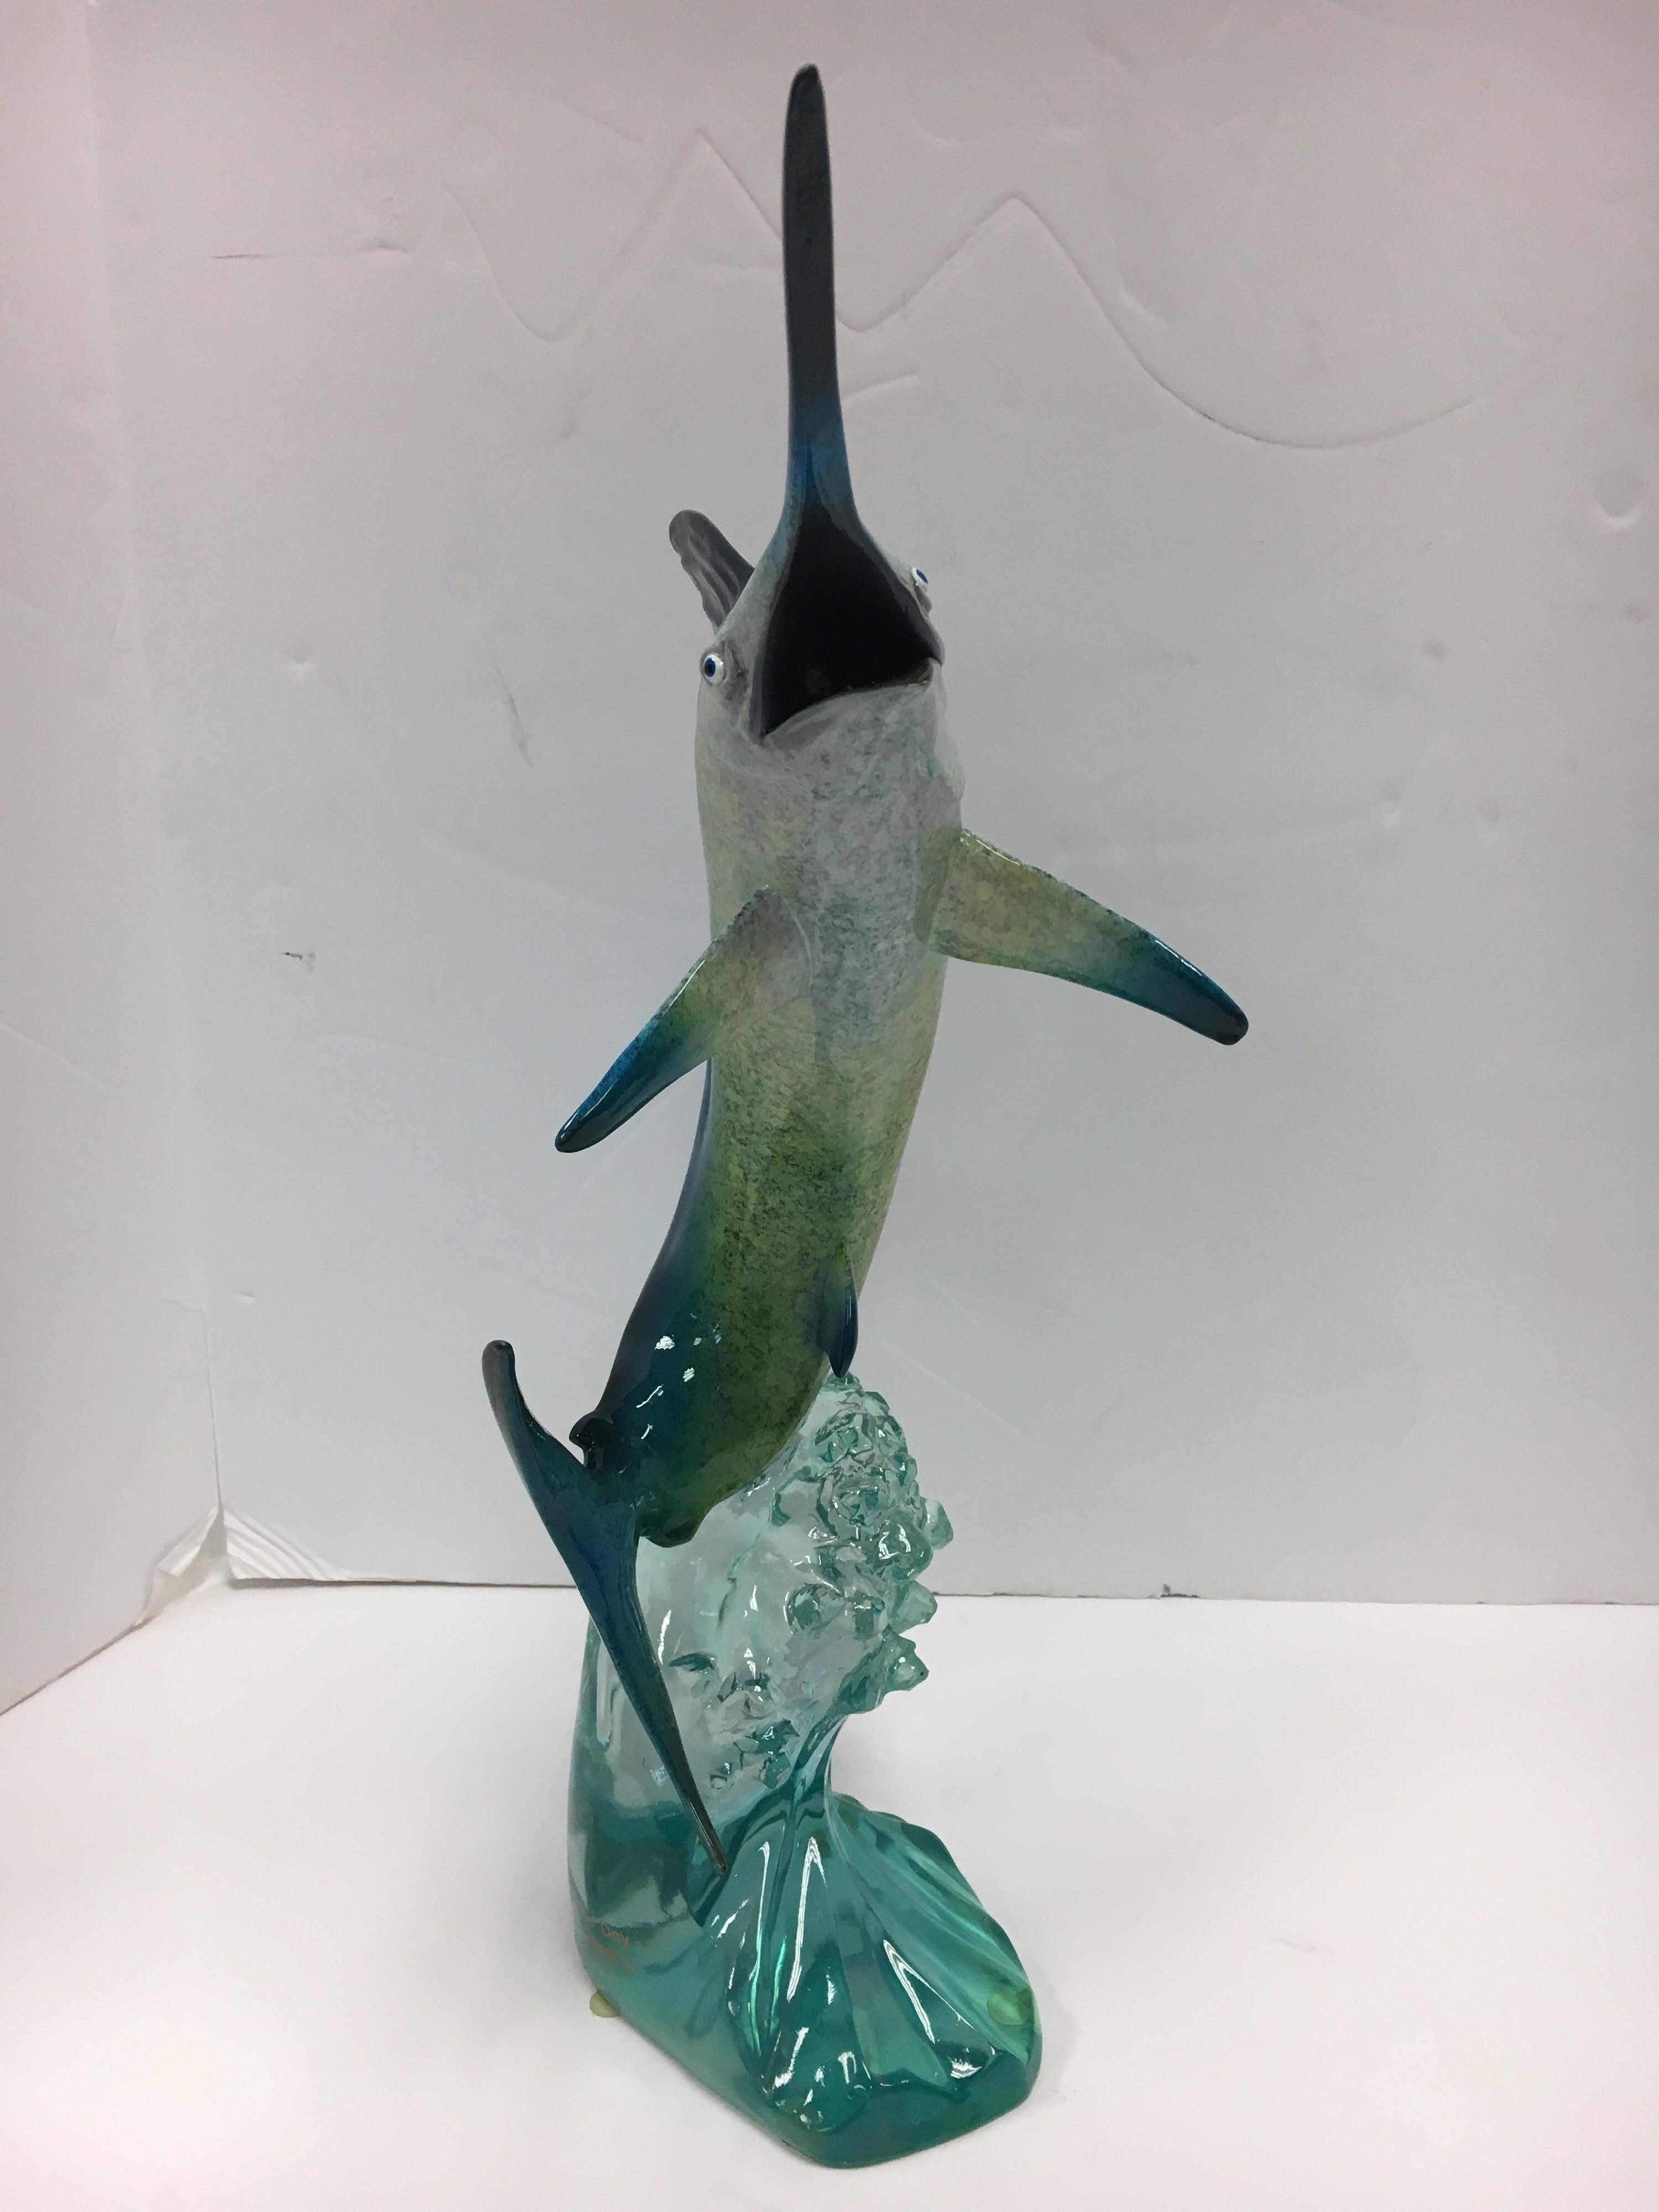 Coveted Robert Wyland marlin sculpture done in Lucite and hallmarked/signed at bottom.